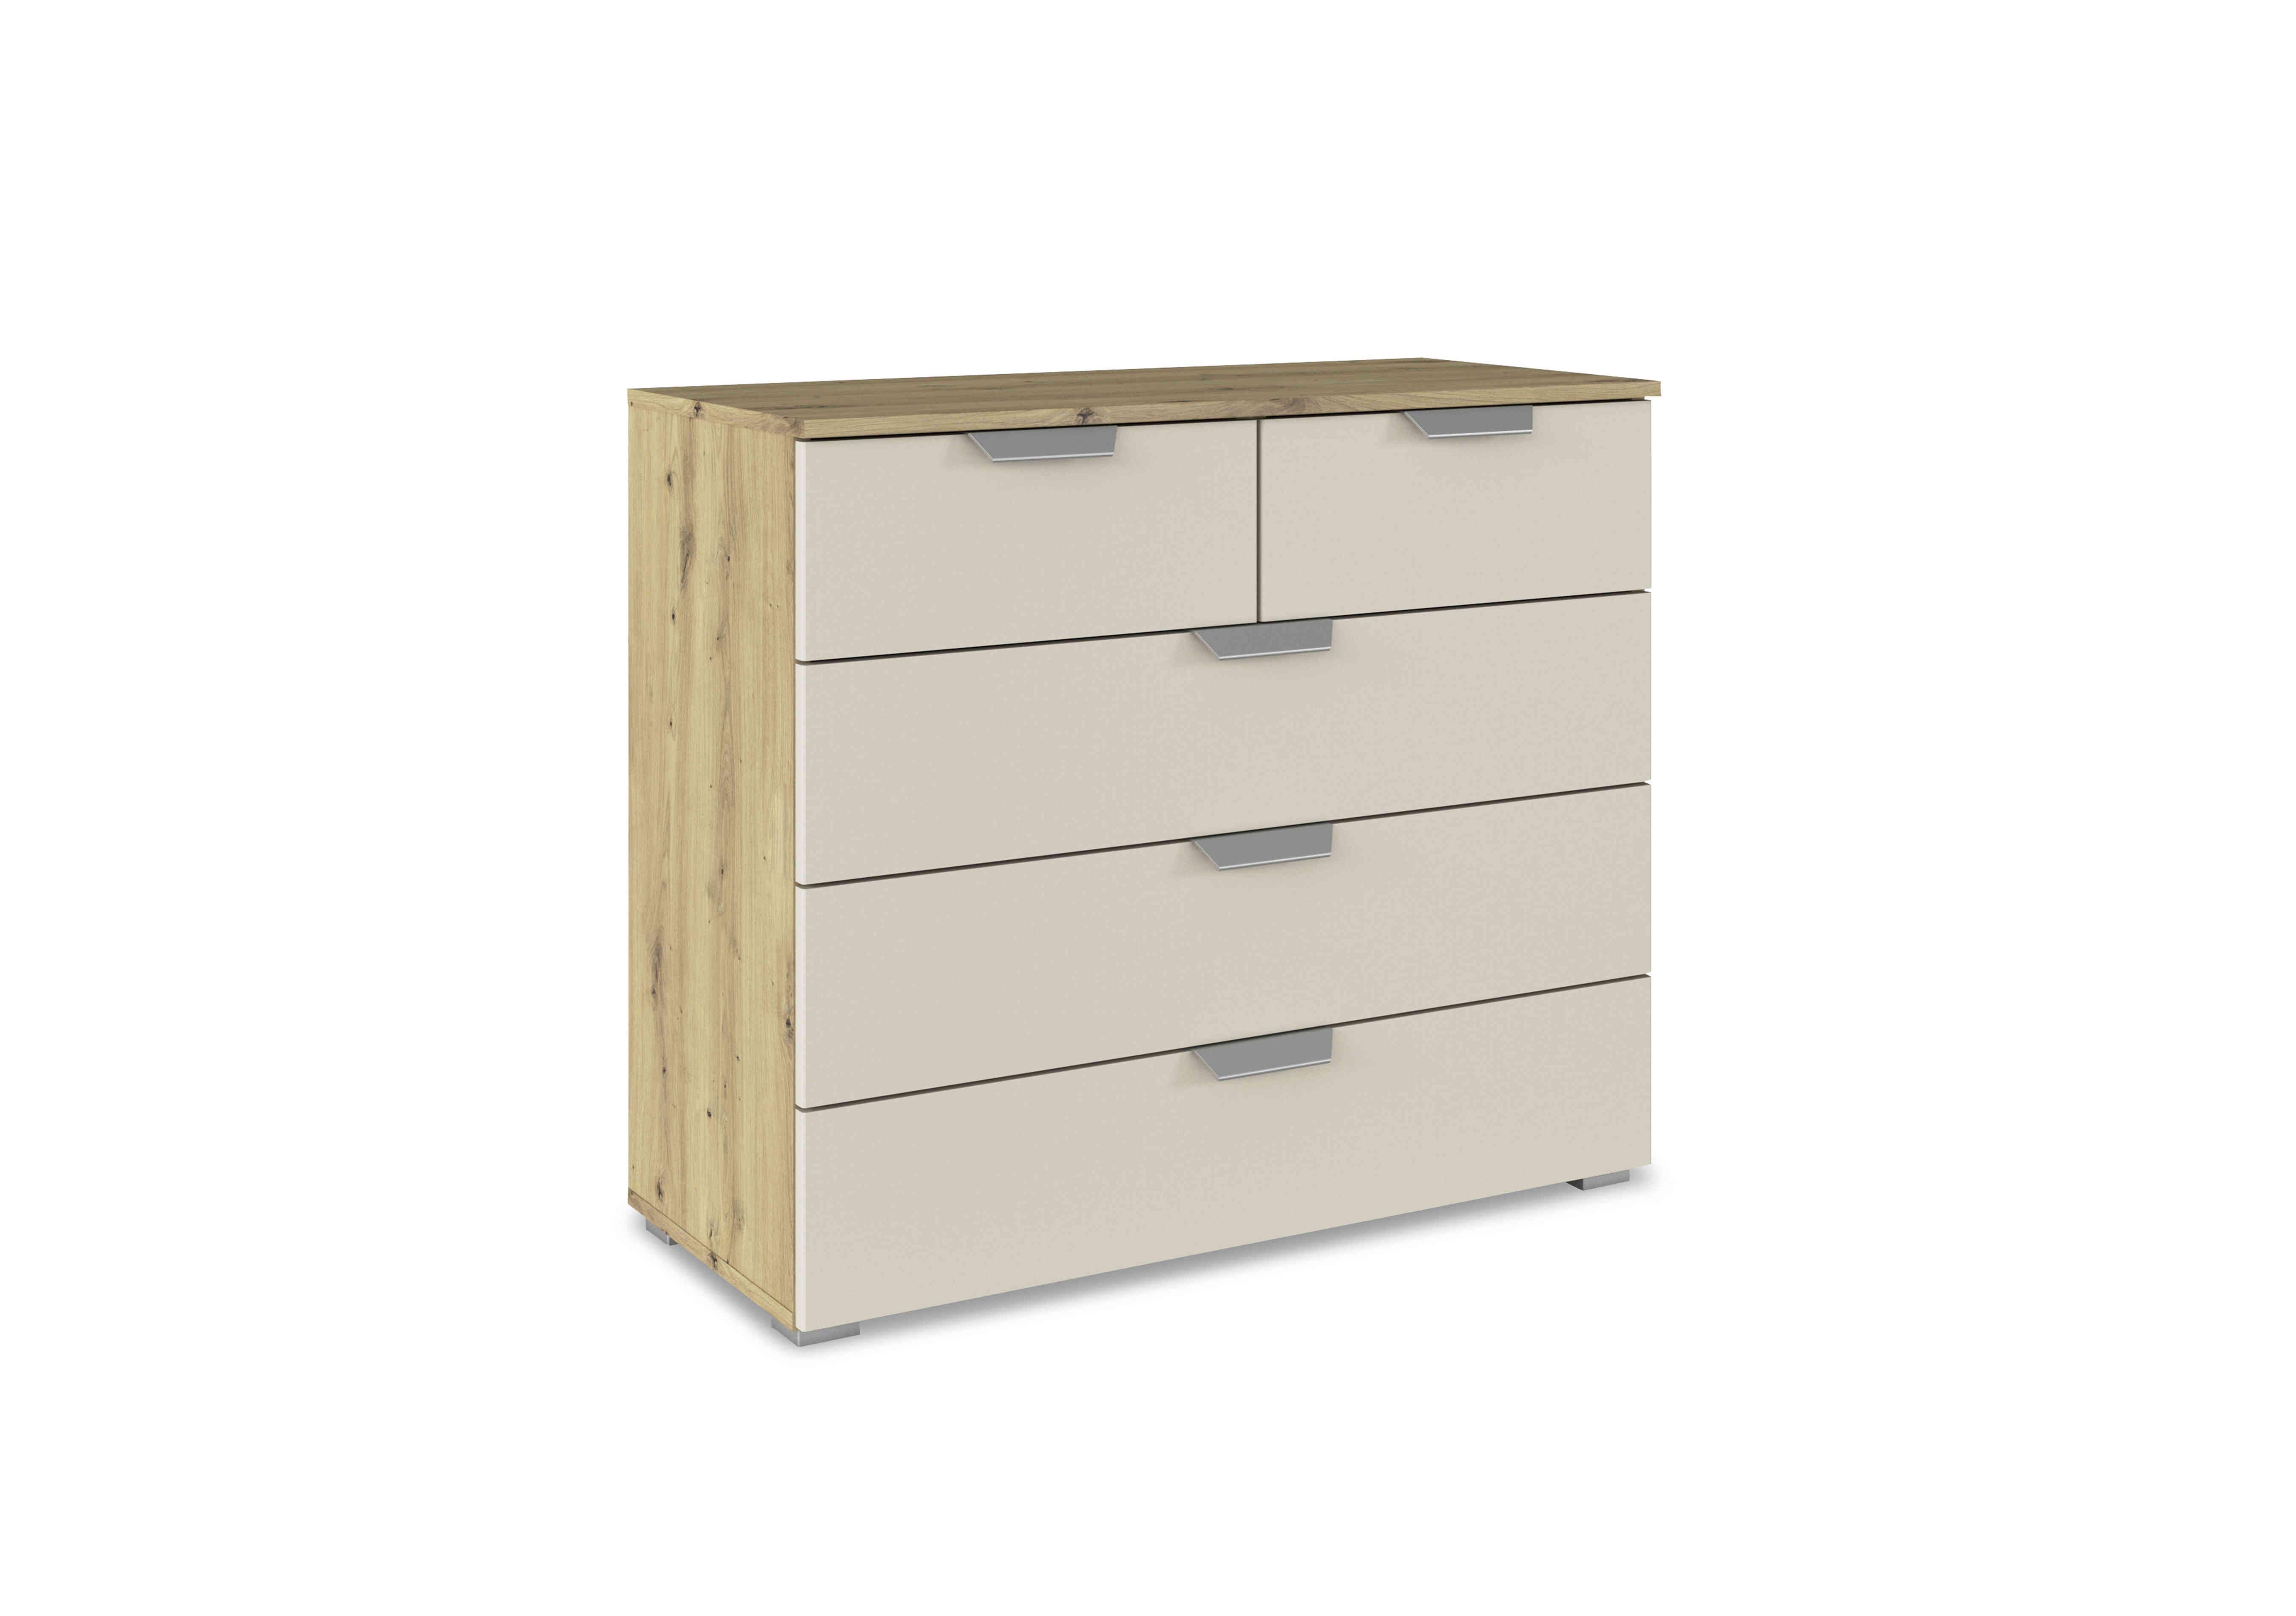 Freja 2+3 Decor Chest of Drawers in Aa63l Champagne on Furniture Village